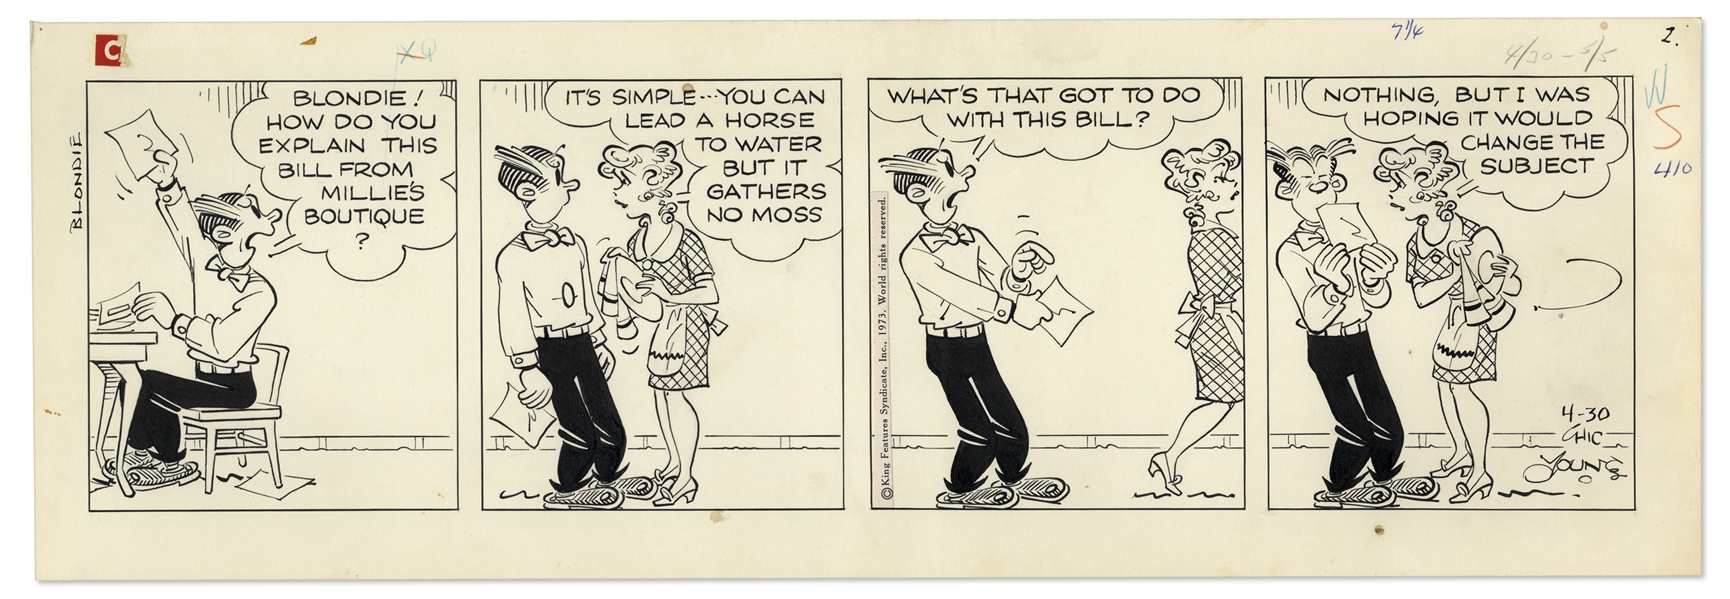 2 Chic Young Hand-Drawn ''Blondie'' Comic Strips From 1973 -- With Chic Young's Original Preliminary Artwork for One